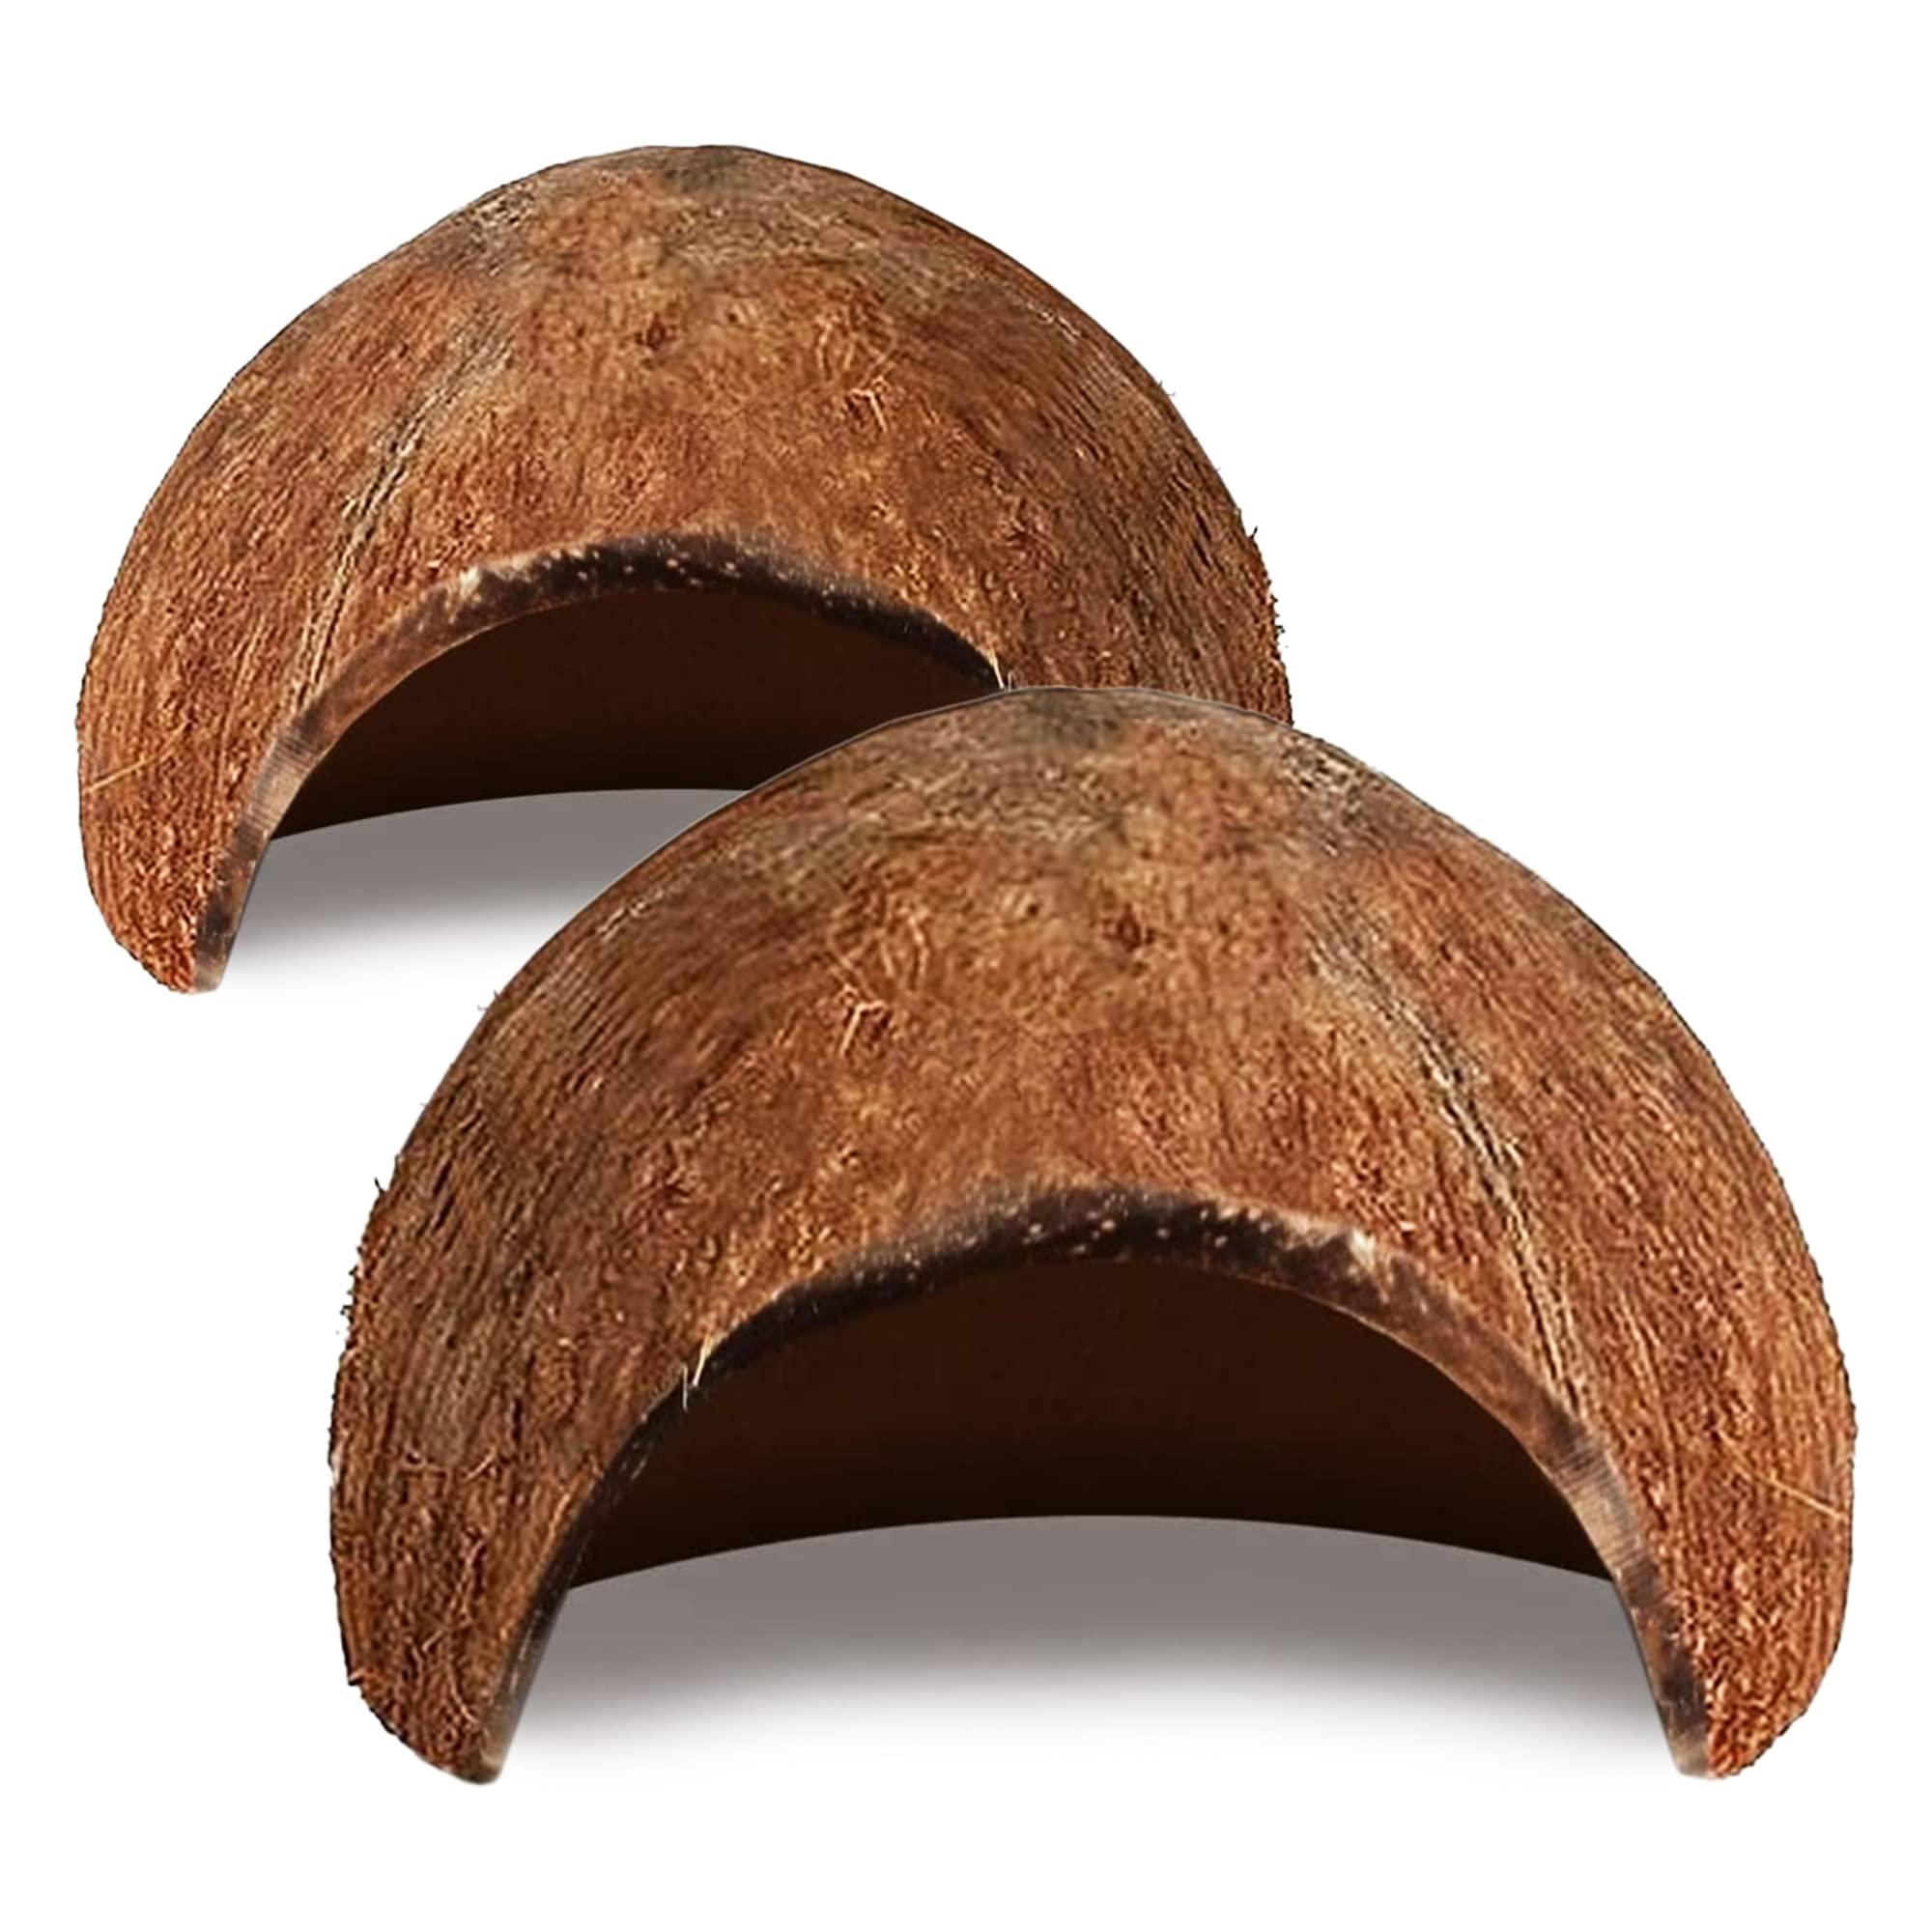 SunGrow Coconut Hut for Crested Gecko, 5x3 Inches Reptile Climbing Hide, Leopard Gecko Tank Cage Habitat Accessories, Smooth-Edged Coconut Shell, for Exercise, Crawling, Perching and Basking Spot